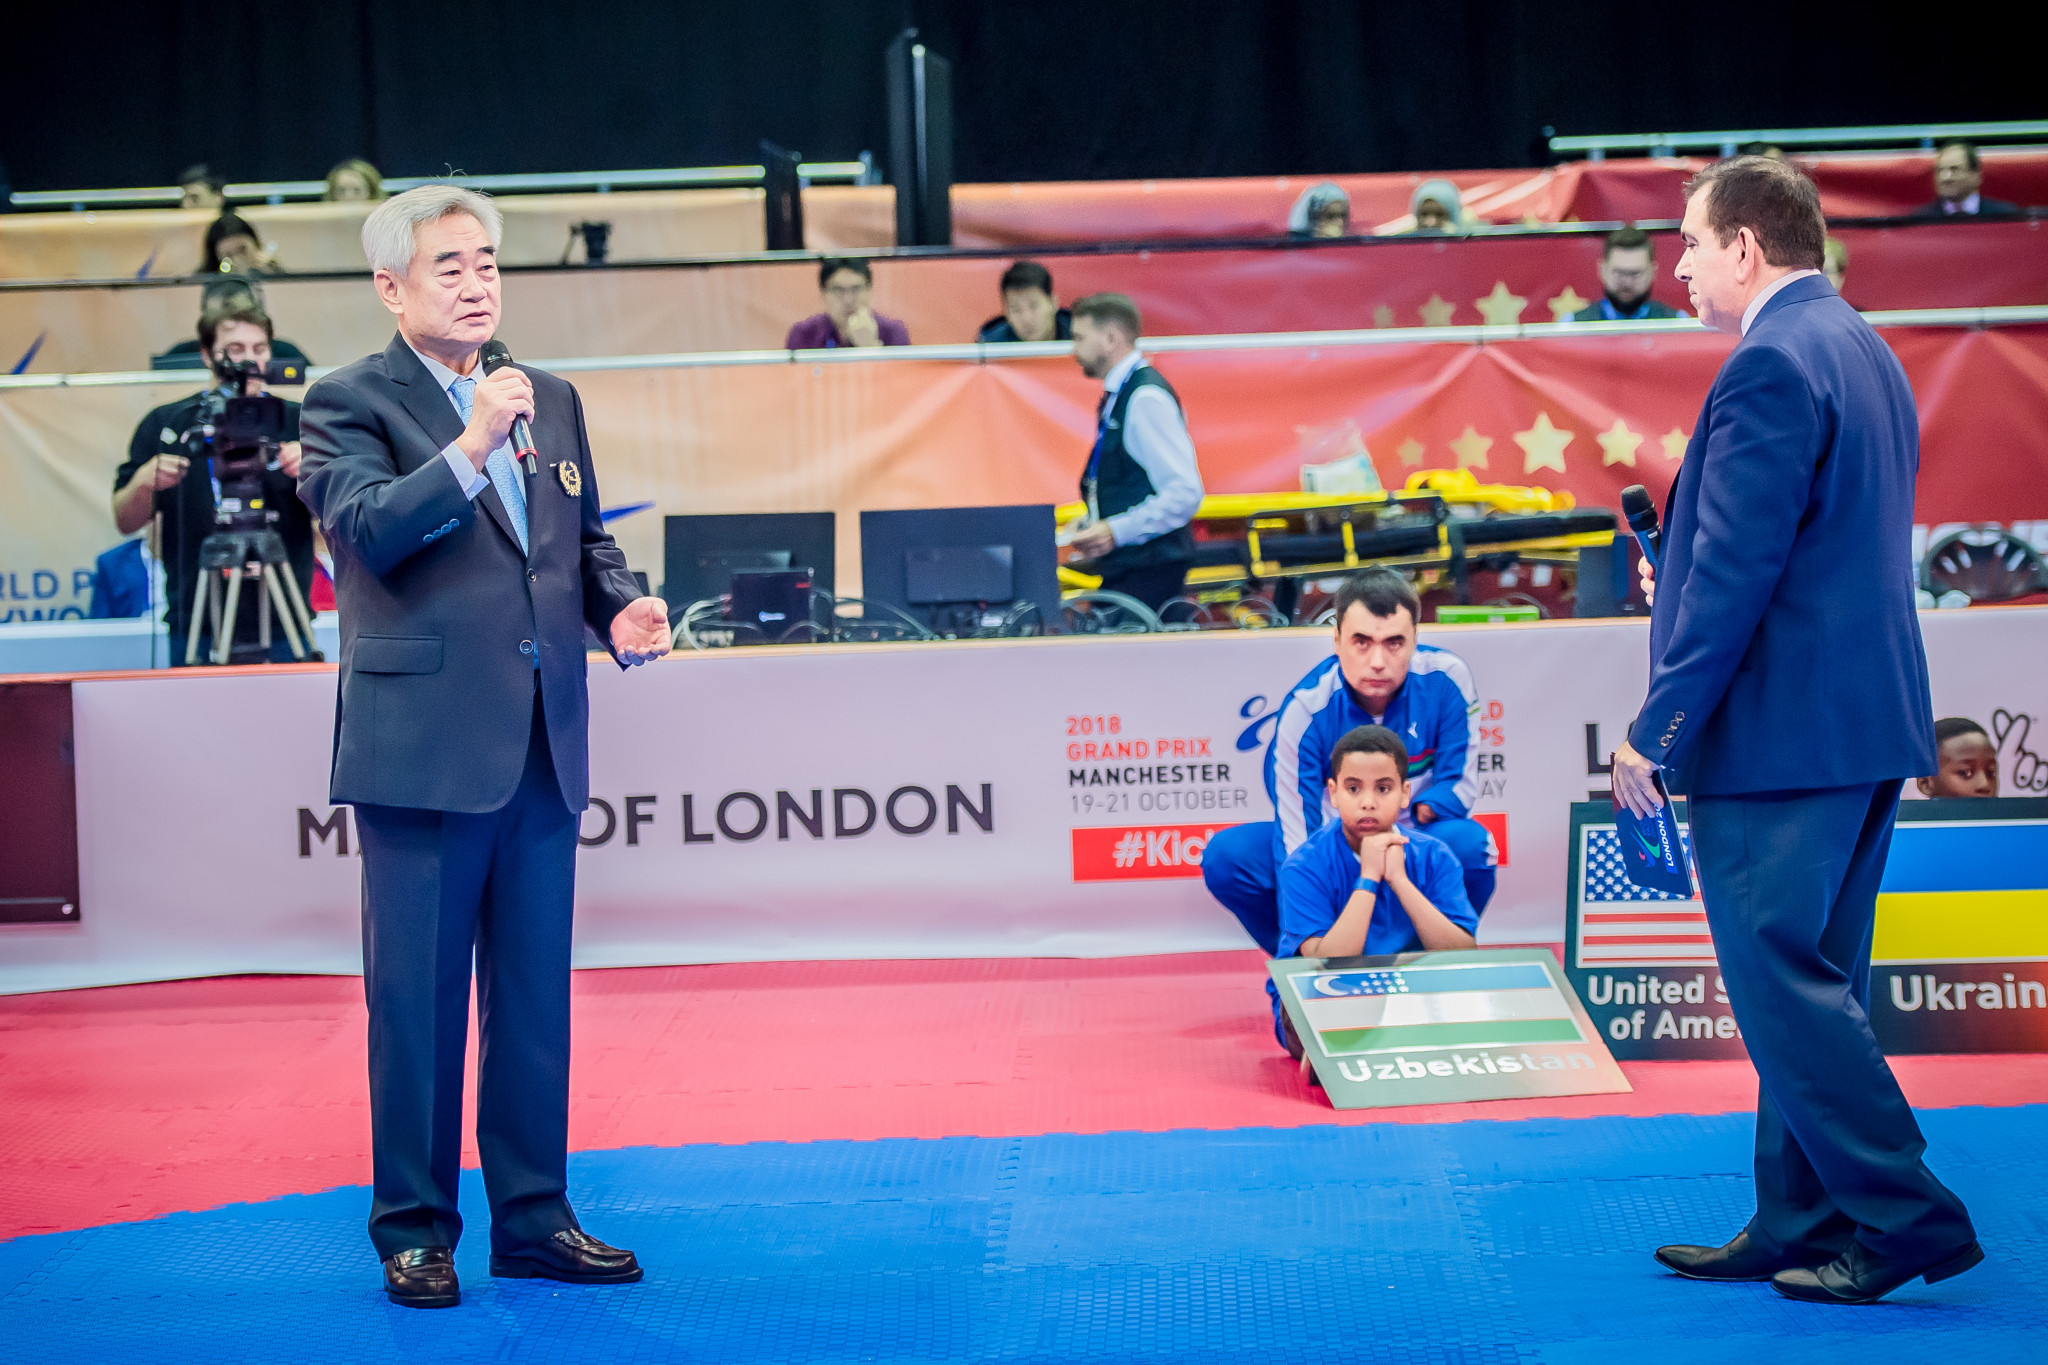 The Opening Ceremony took place earlier in the day with World Taekwondo President Chungwon Choue delivering a speech ©World Taekwondo